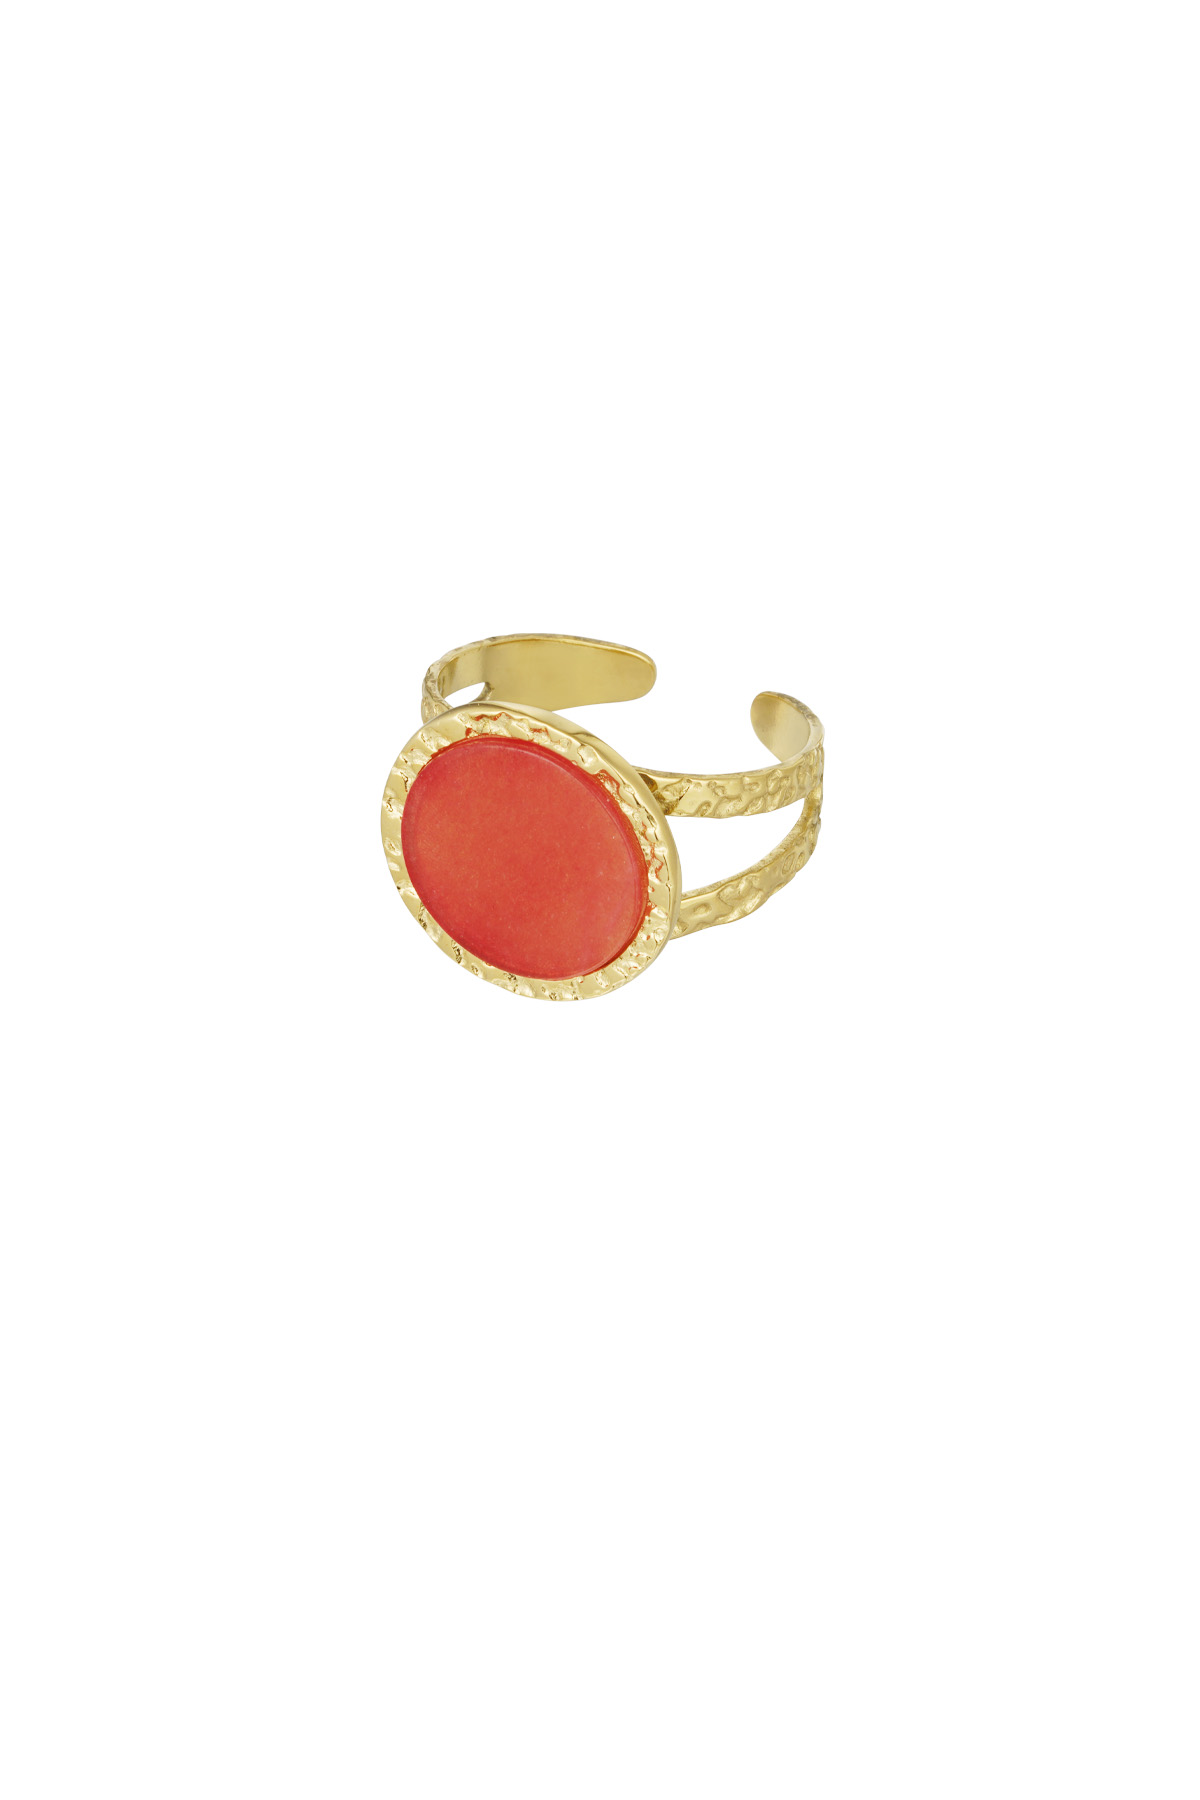 Statement ring vintage look - red gold